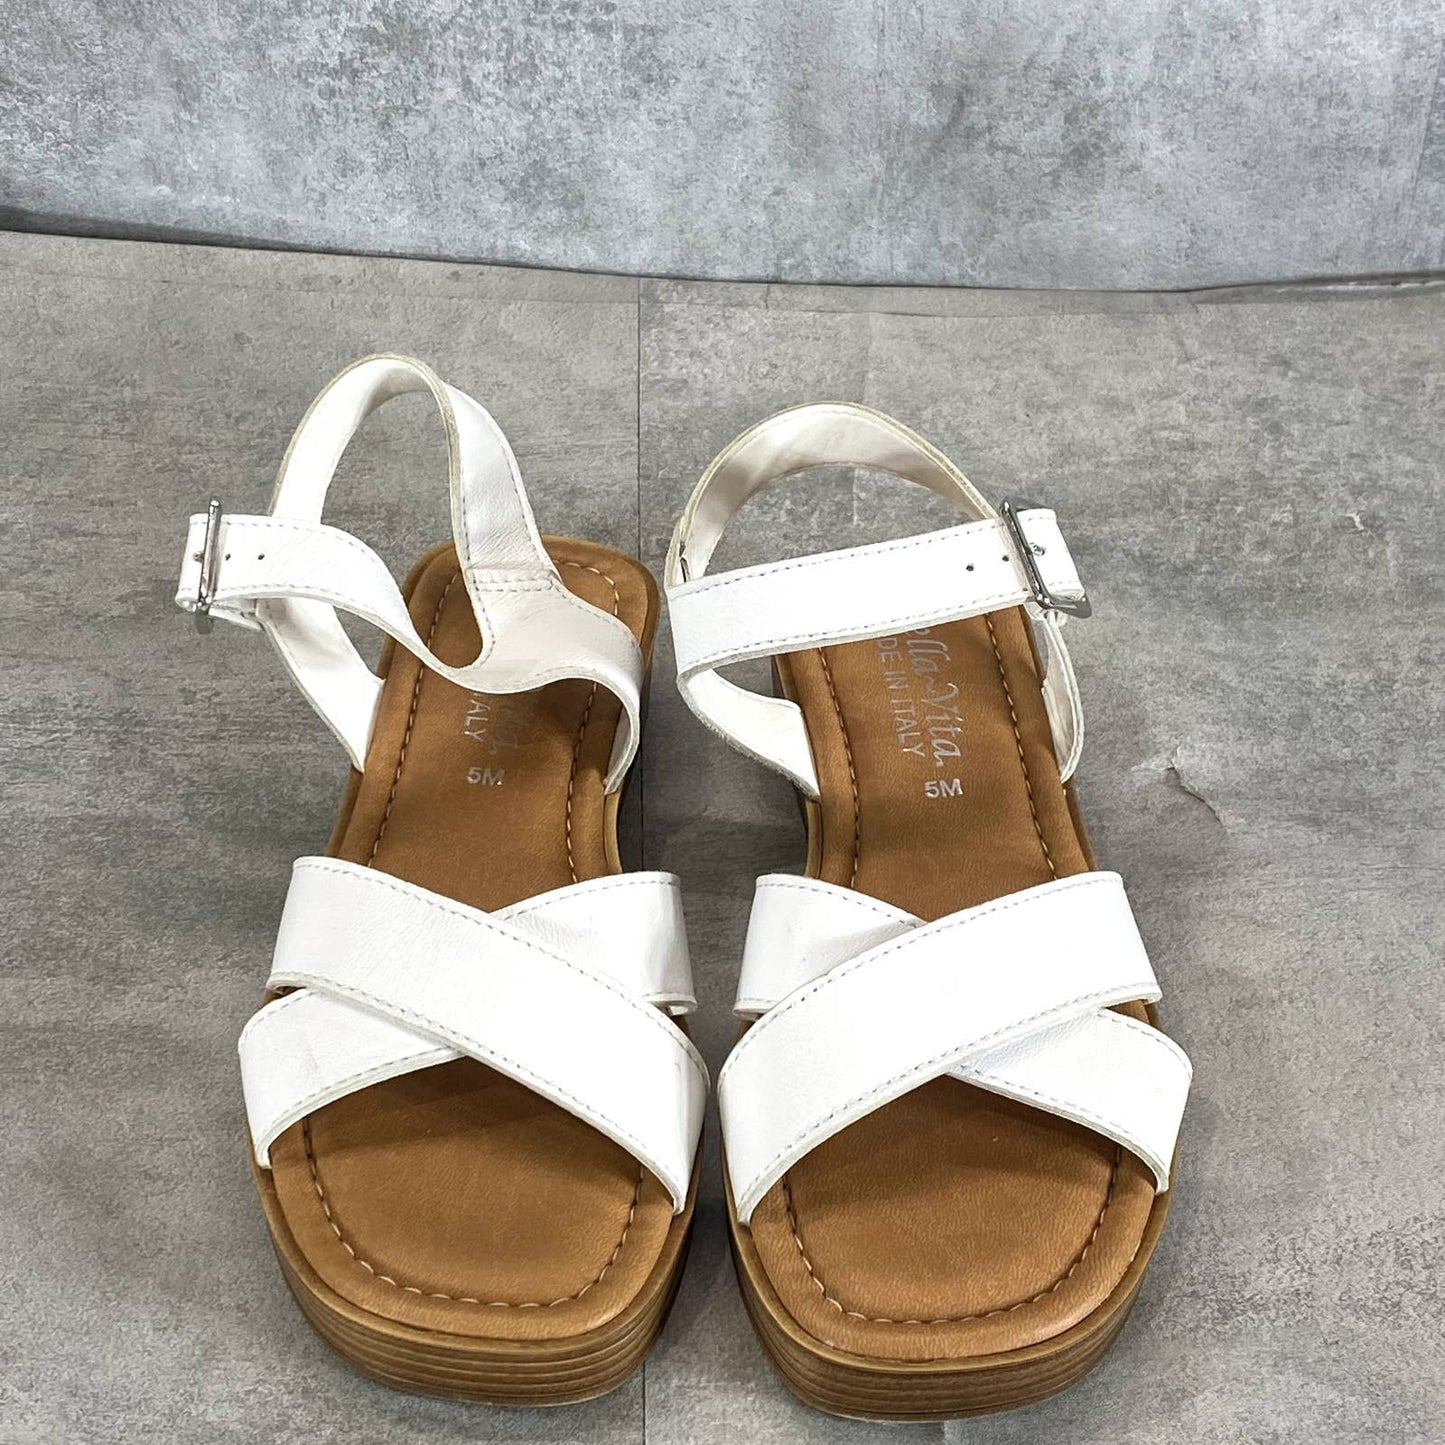 BELLA-VITA Women's White Leather Car-Italy Wedge Ankle-Strap Sandals SZ 5